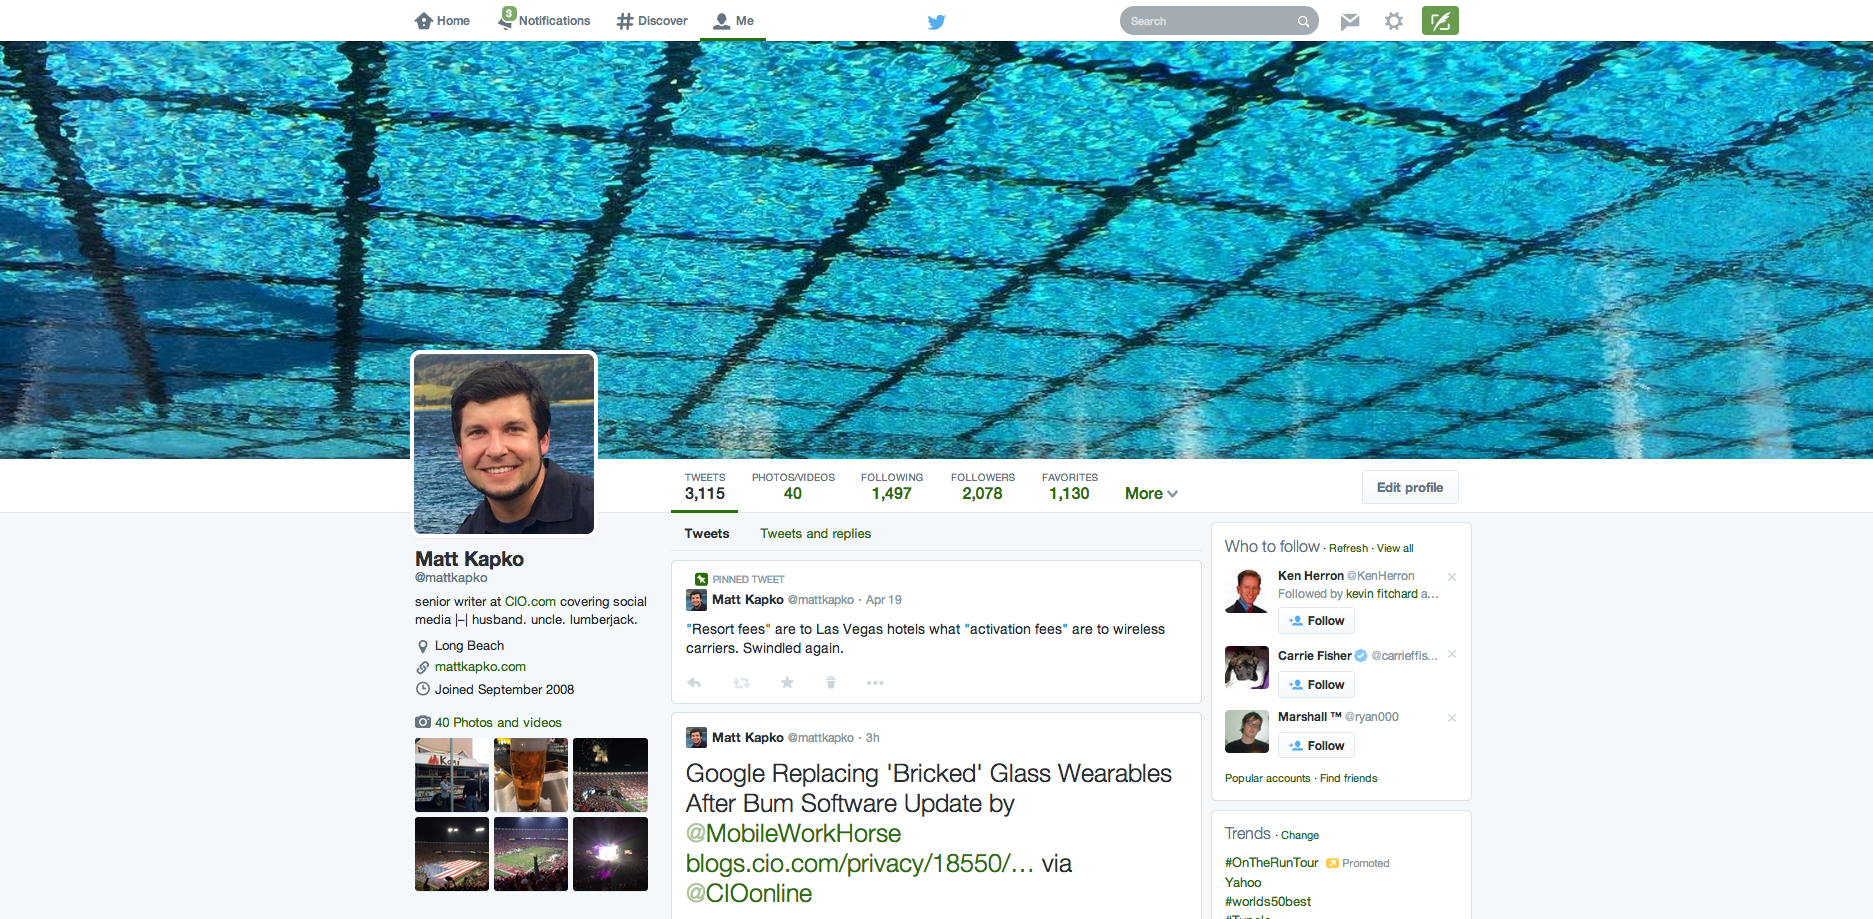 New Twitter Profile Page